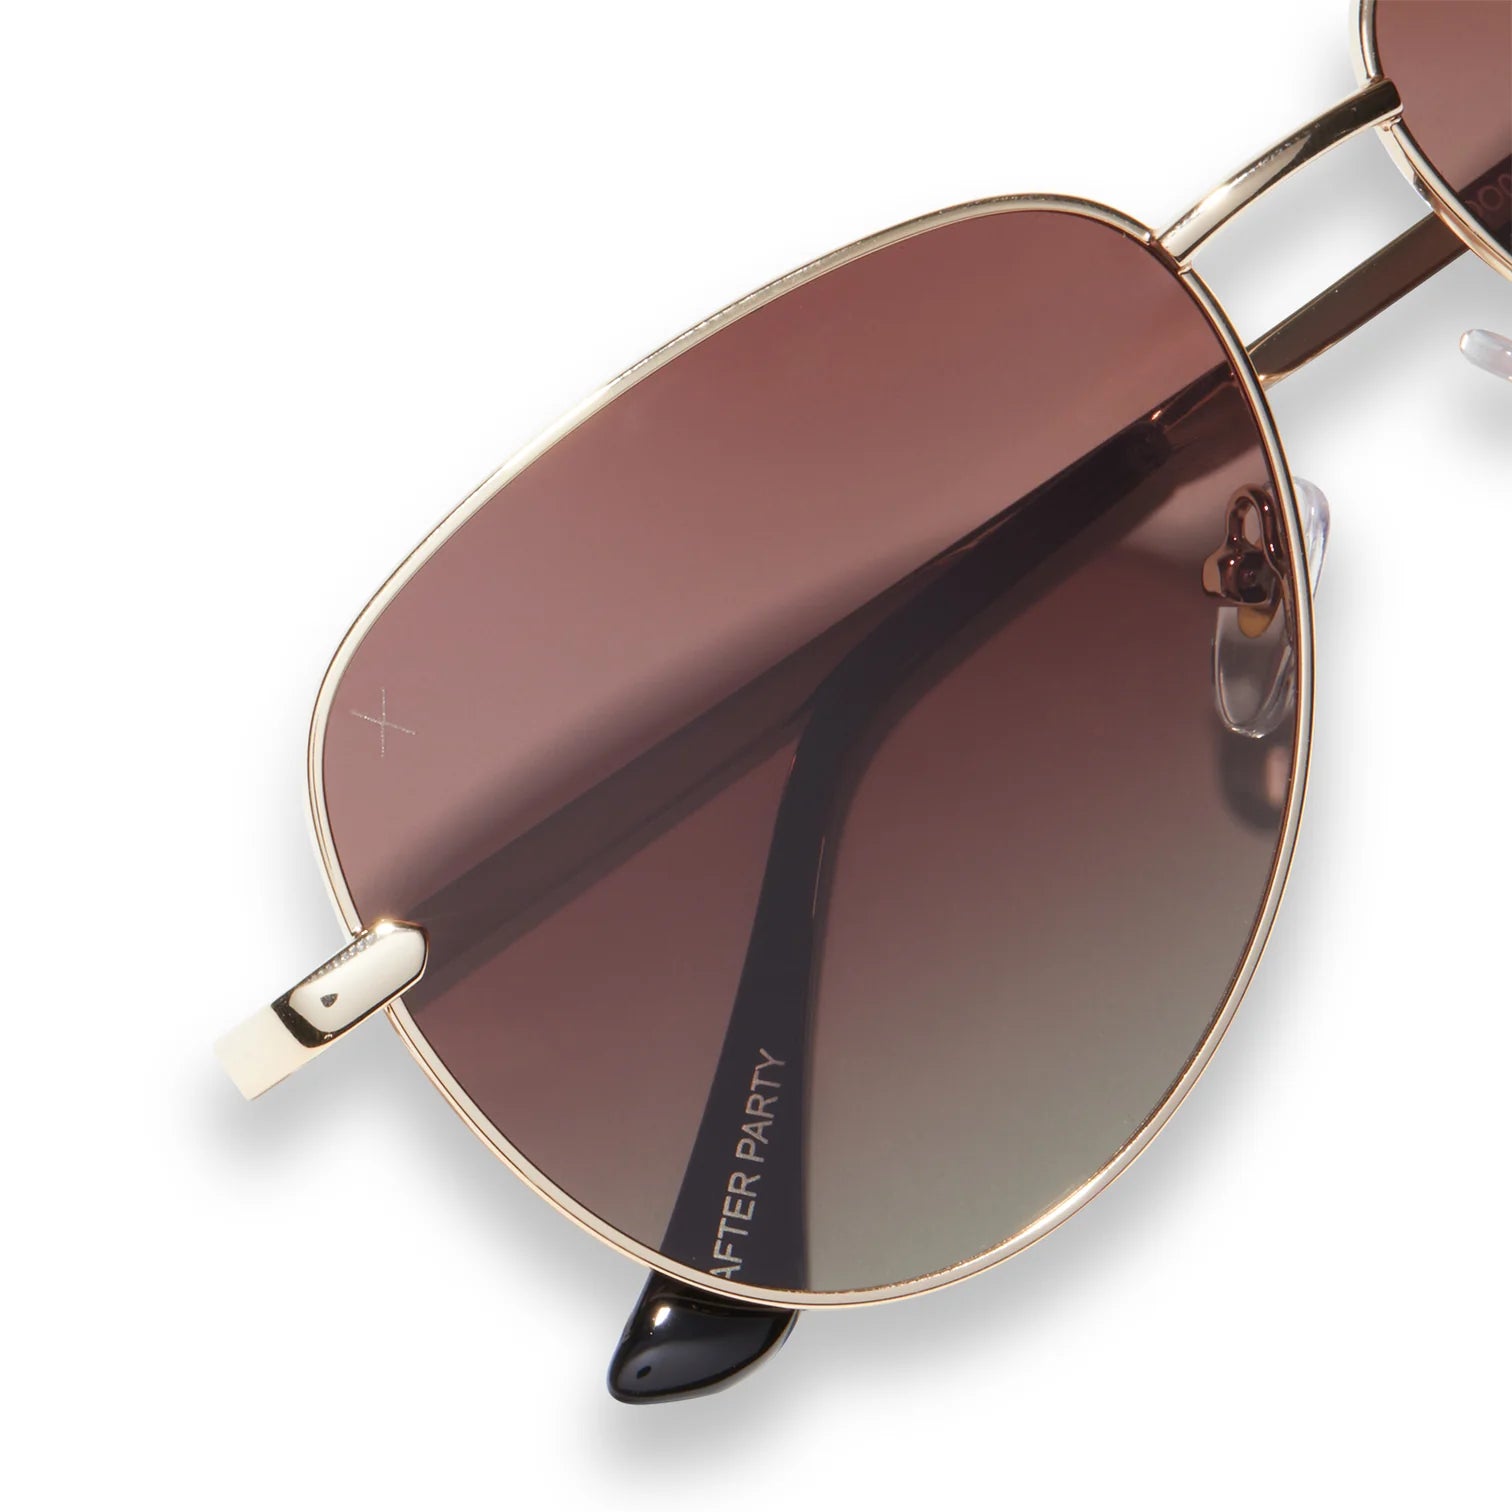 After Party Gold & Brown Polarized Sunglasses